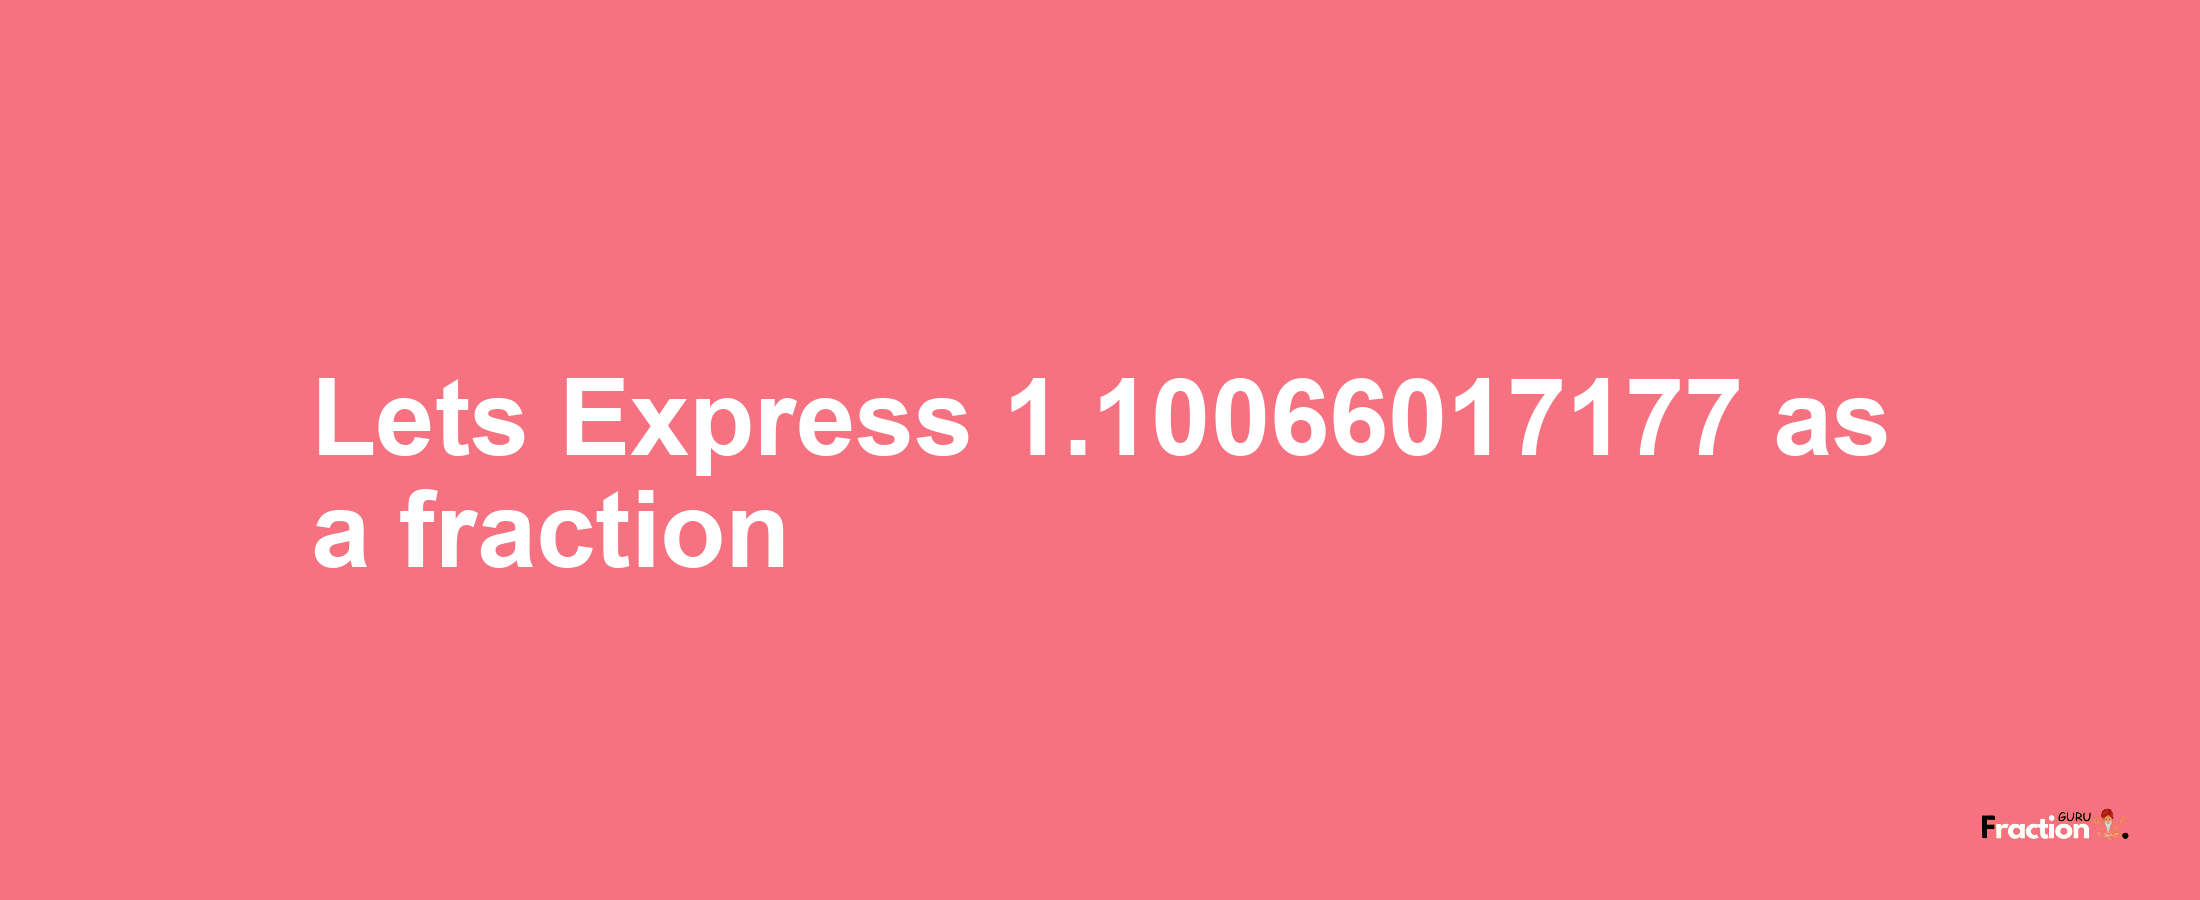 Lets Express 1.10066017177 as afraction